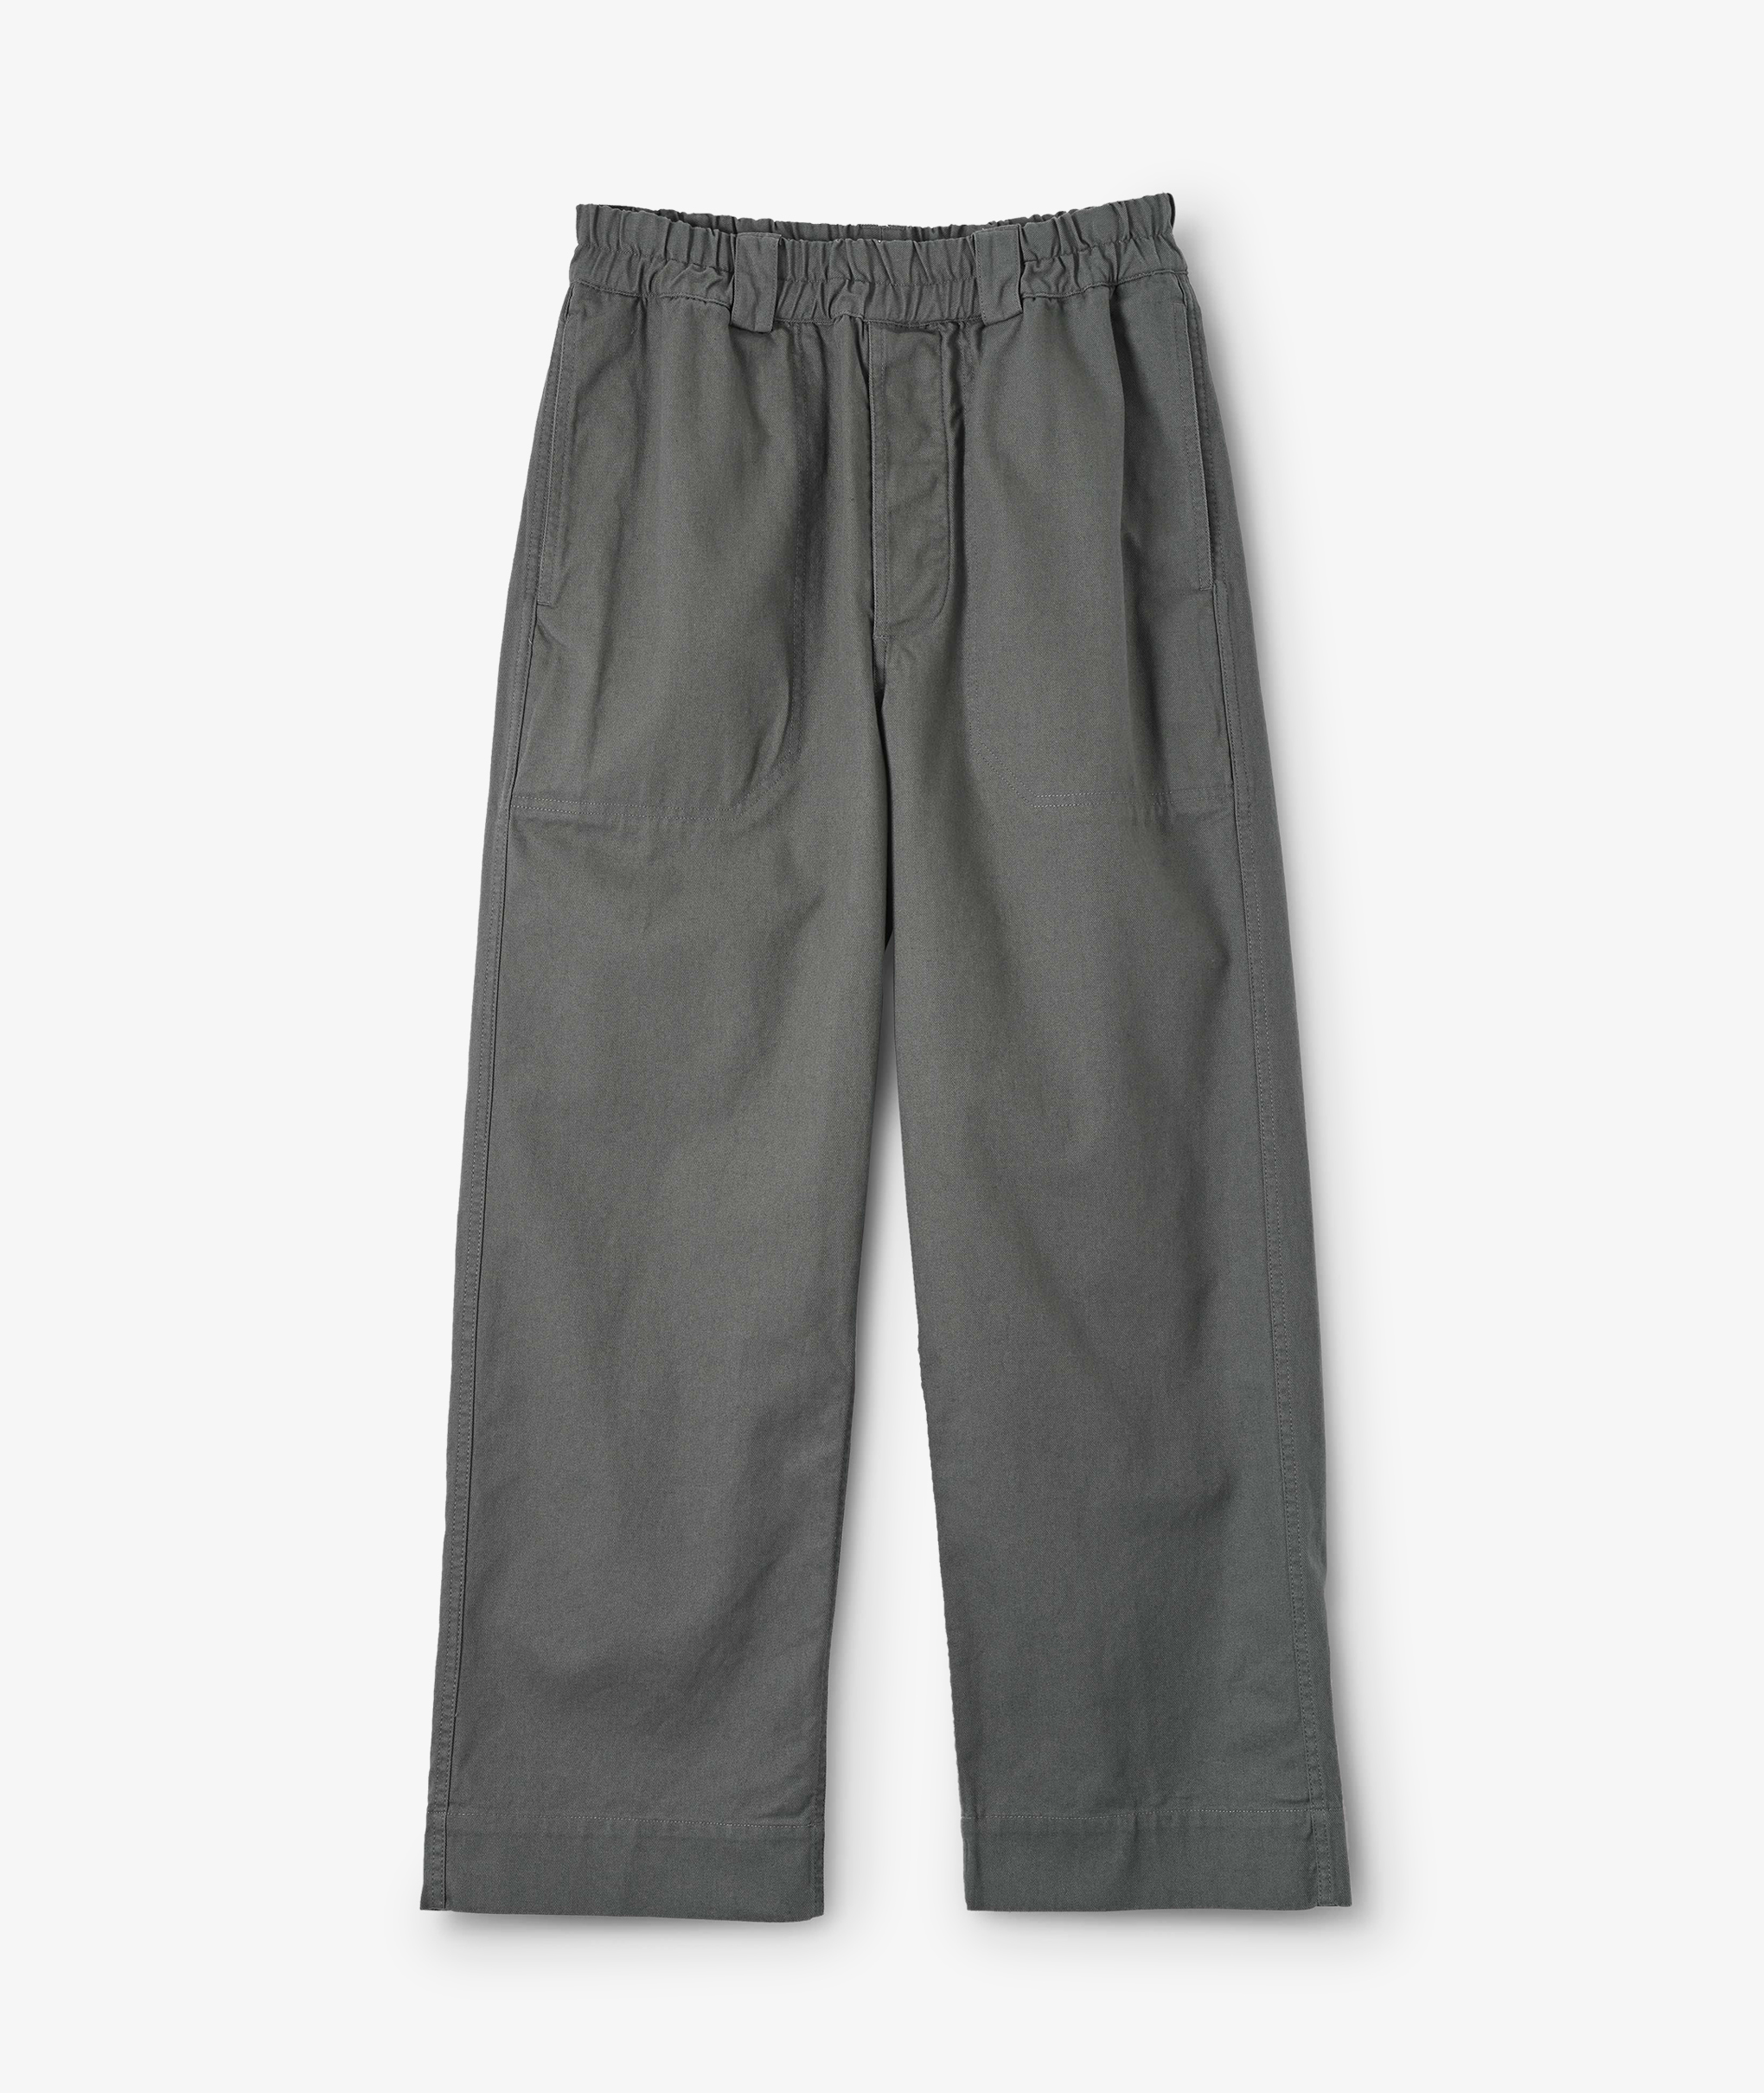 Norse Store  Shipping Worldwide - Margaret Howell MHL Zip Pocket Jogger -  Worn Green